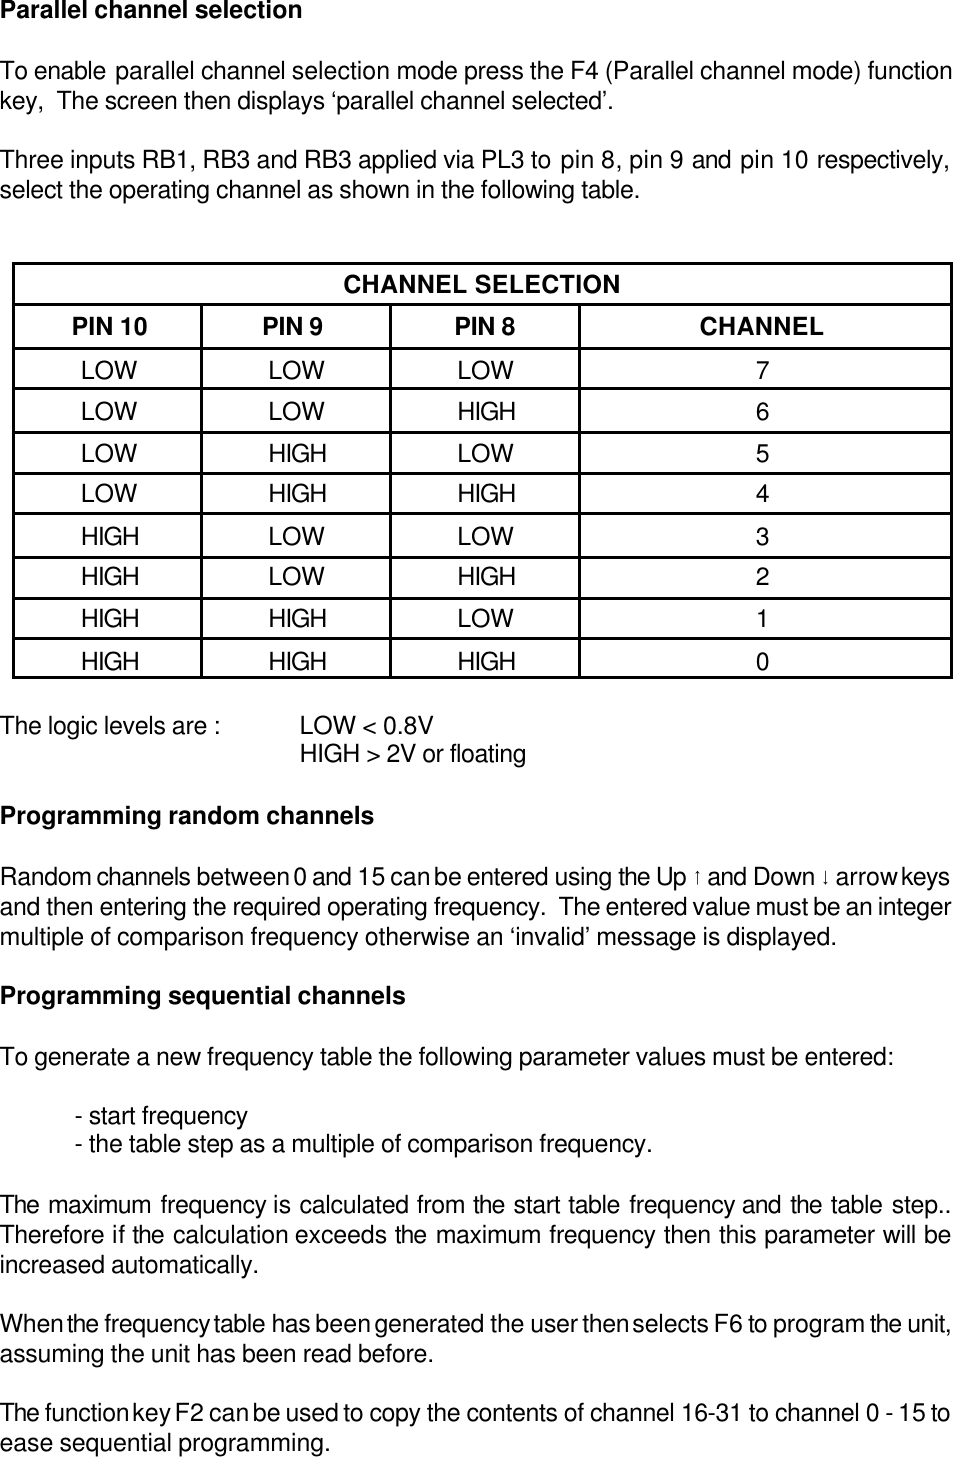 Parallel channel selectionTo enable parallel channel selection mode press the F4 (Parallel channel mode) functionkey,  The screen then displays ‘parallel channel selected’.  Three inputs RB1, RB3 and RB3 applied via PL3 to pin 8, pin 9 and pin 10 respectively,select the operating channel as shown in the following table.CHANNEL SELECTION PIN 10 PIN 9 PIN 8 CHANNELLOW LOW LOW 7LOW LOW HIGH 6LOW HIGH LOW 5LOW HIGH HIGH 4HIGH LOW LOW 3HIGH LOW HIGH 2HIGH HIGH LOW 1HIGH HIGH HIGH 0The logic levels are :  LOW &lt; 0.8VHIGH &gt; 2V or floatingProgramming random channelsRandom channels between 0 and 15 can be entered using the Up 8 and Down 9 arrow keysand then entering the required operating frequency.  The entered value must be an integermultiple of comparison frequency otherwise an ‘invalid’ message is displayed.Programming sequential channelsTo generate a new frequency table the following parameter values must be entered:- start frequency- the table step as a multiple of comparison frequency.The maximum frequency is calculated from the start table frequency and the table step..Therefore if the calculation exceeds the maximum frequency then this parameter will beincreased automatically.When the frequency table has been generated the user then selects F6 to program the unit,assuming the unit has been read before.The function key F2 can be used to copy the contents of channel 16-31 to channel 0 - 15 toease sequential programming.